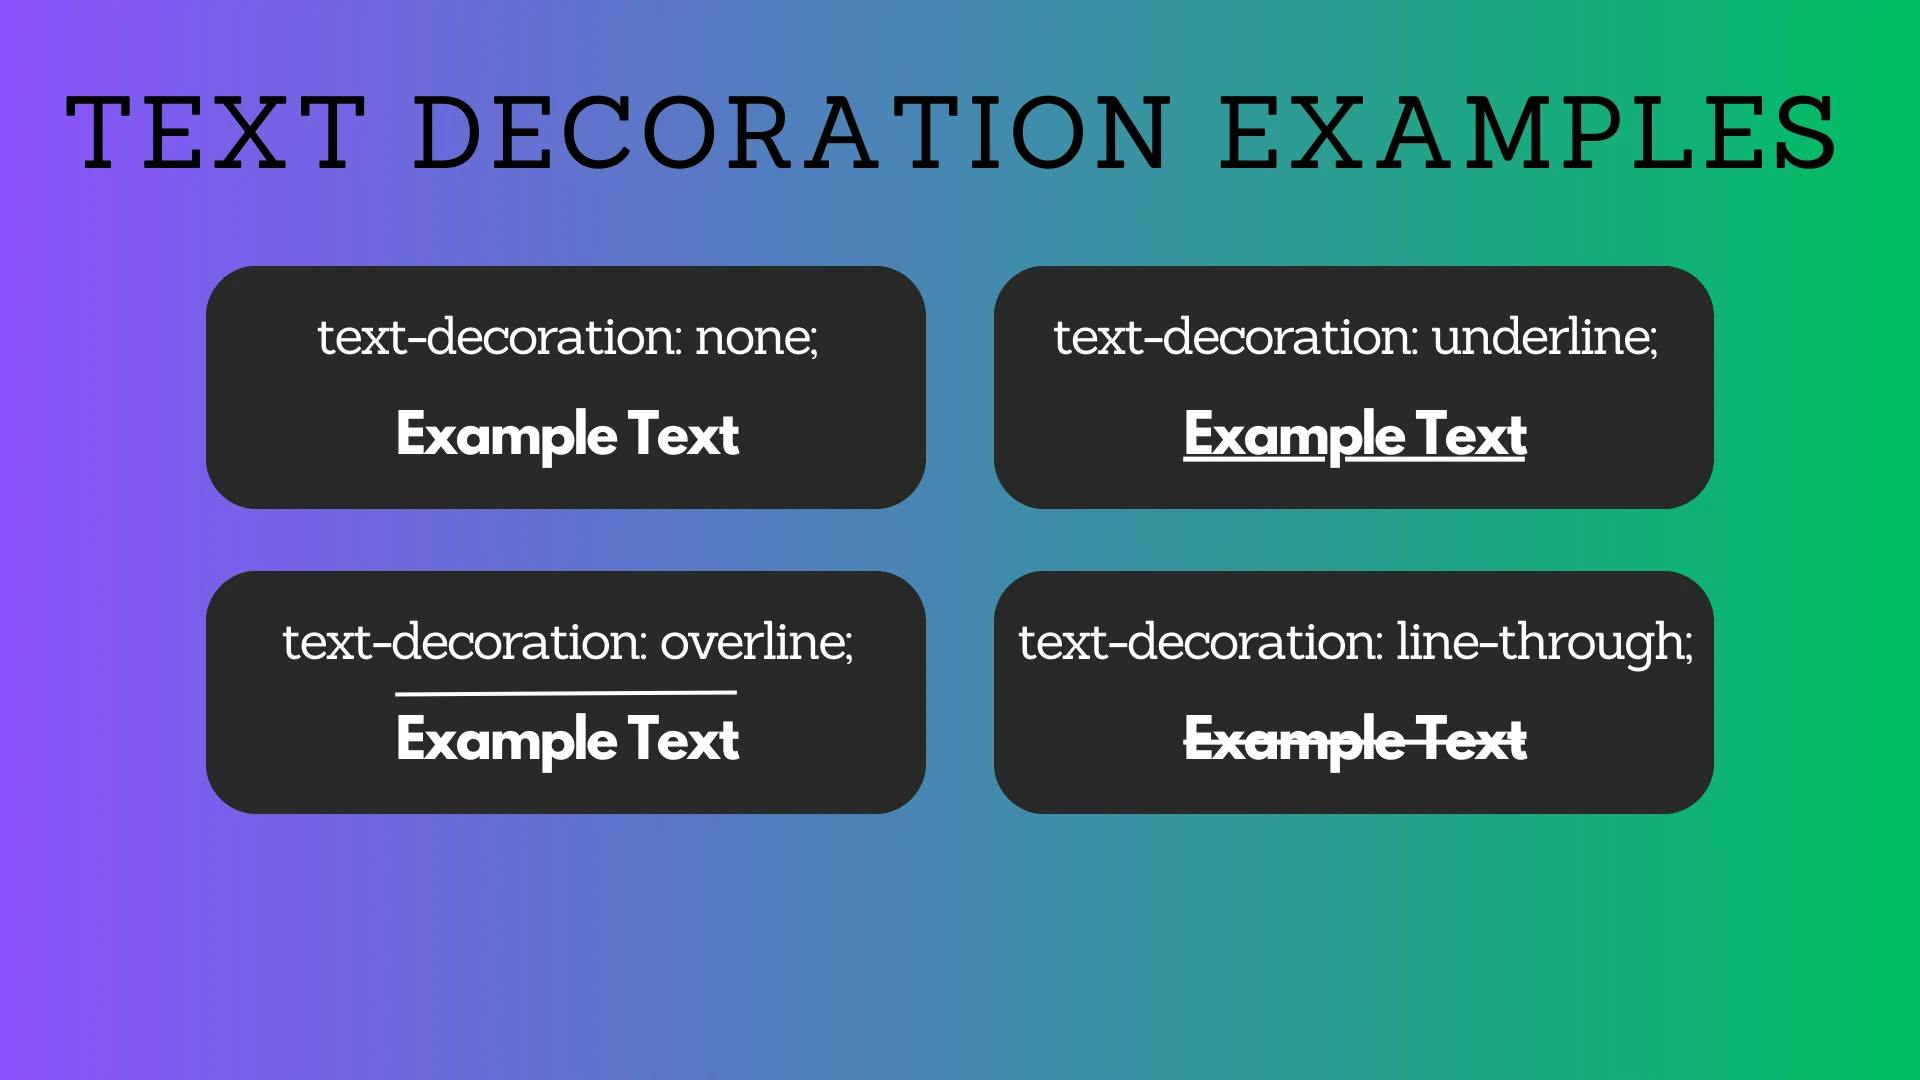 CSS text decoration examples for none, underline, overline, and line-through